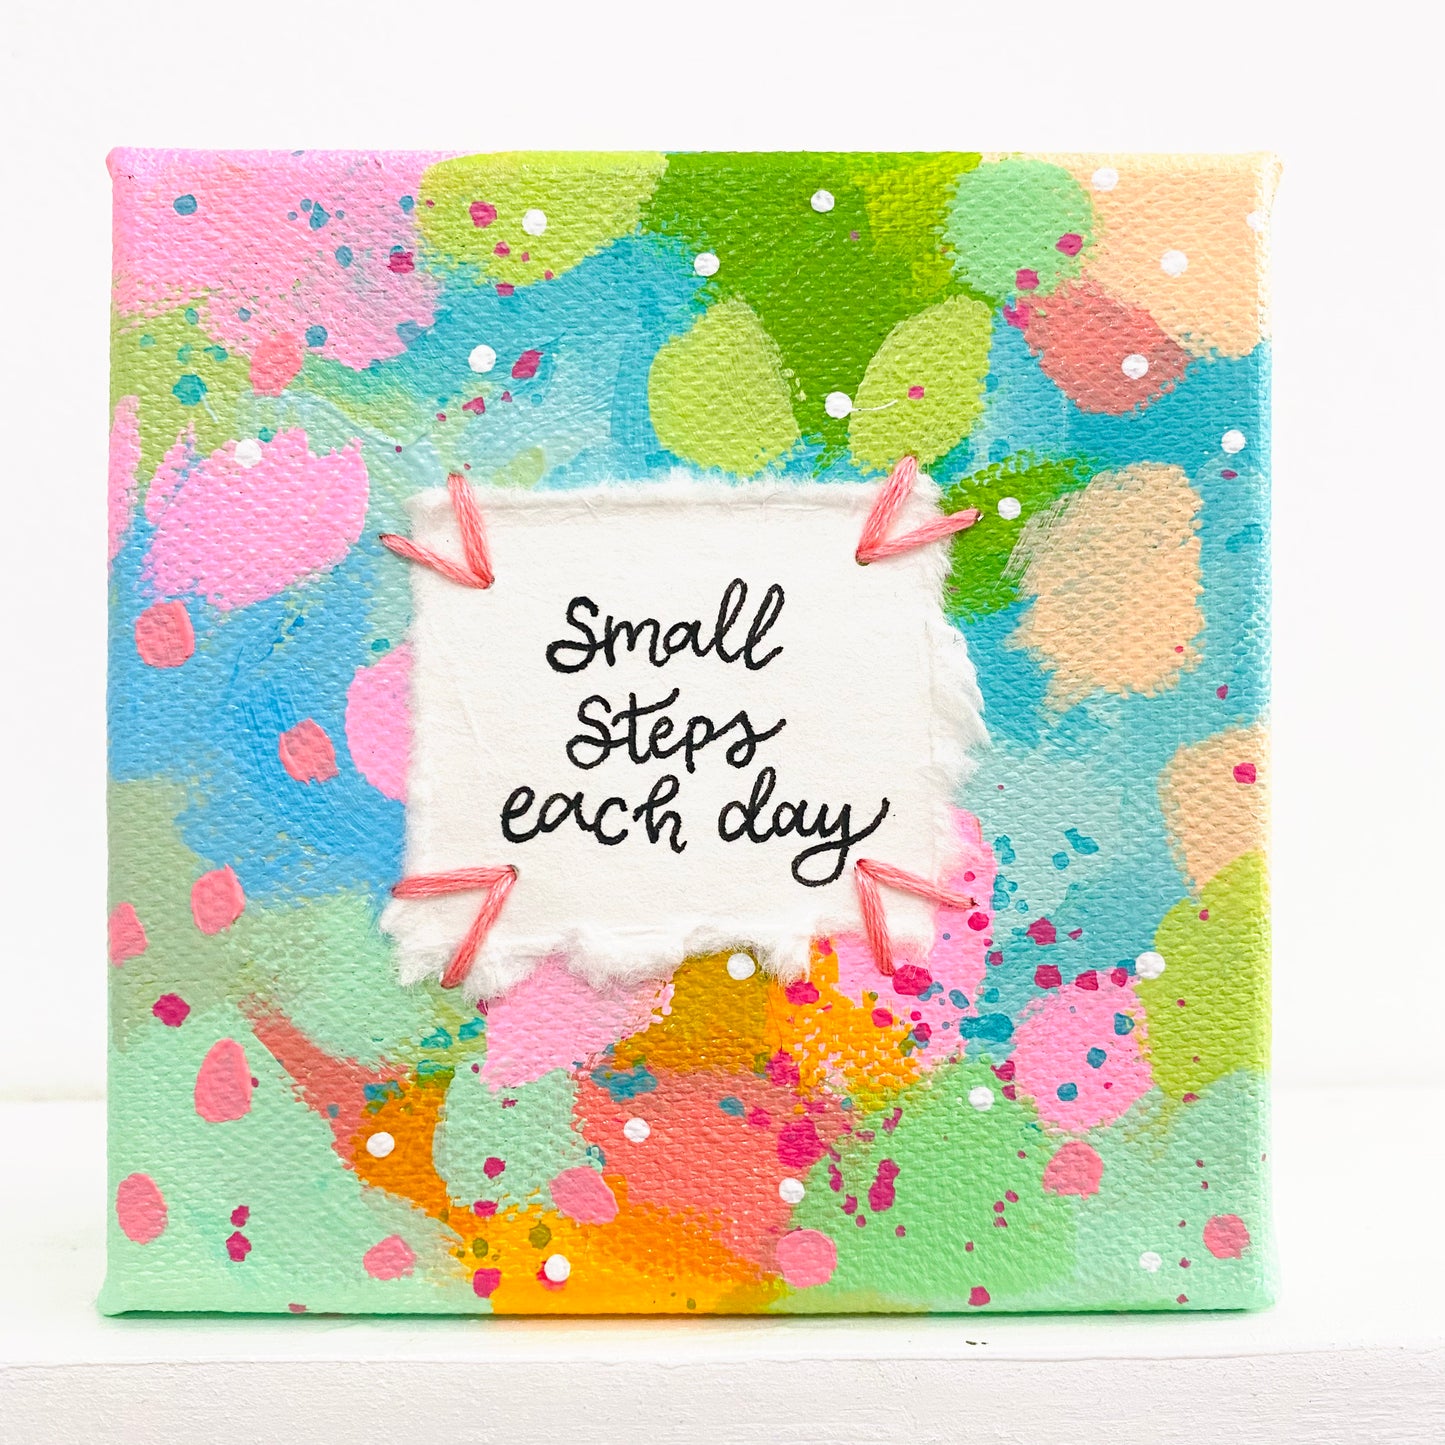 Small Steps Each Day 4x4 inch original abstract canvas with embroidery thread accents